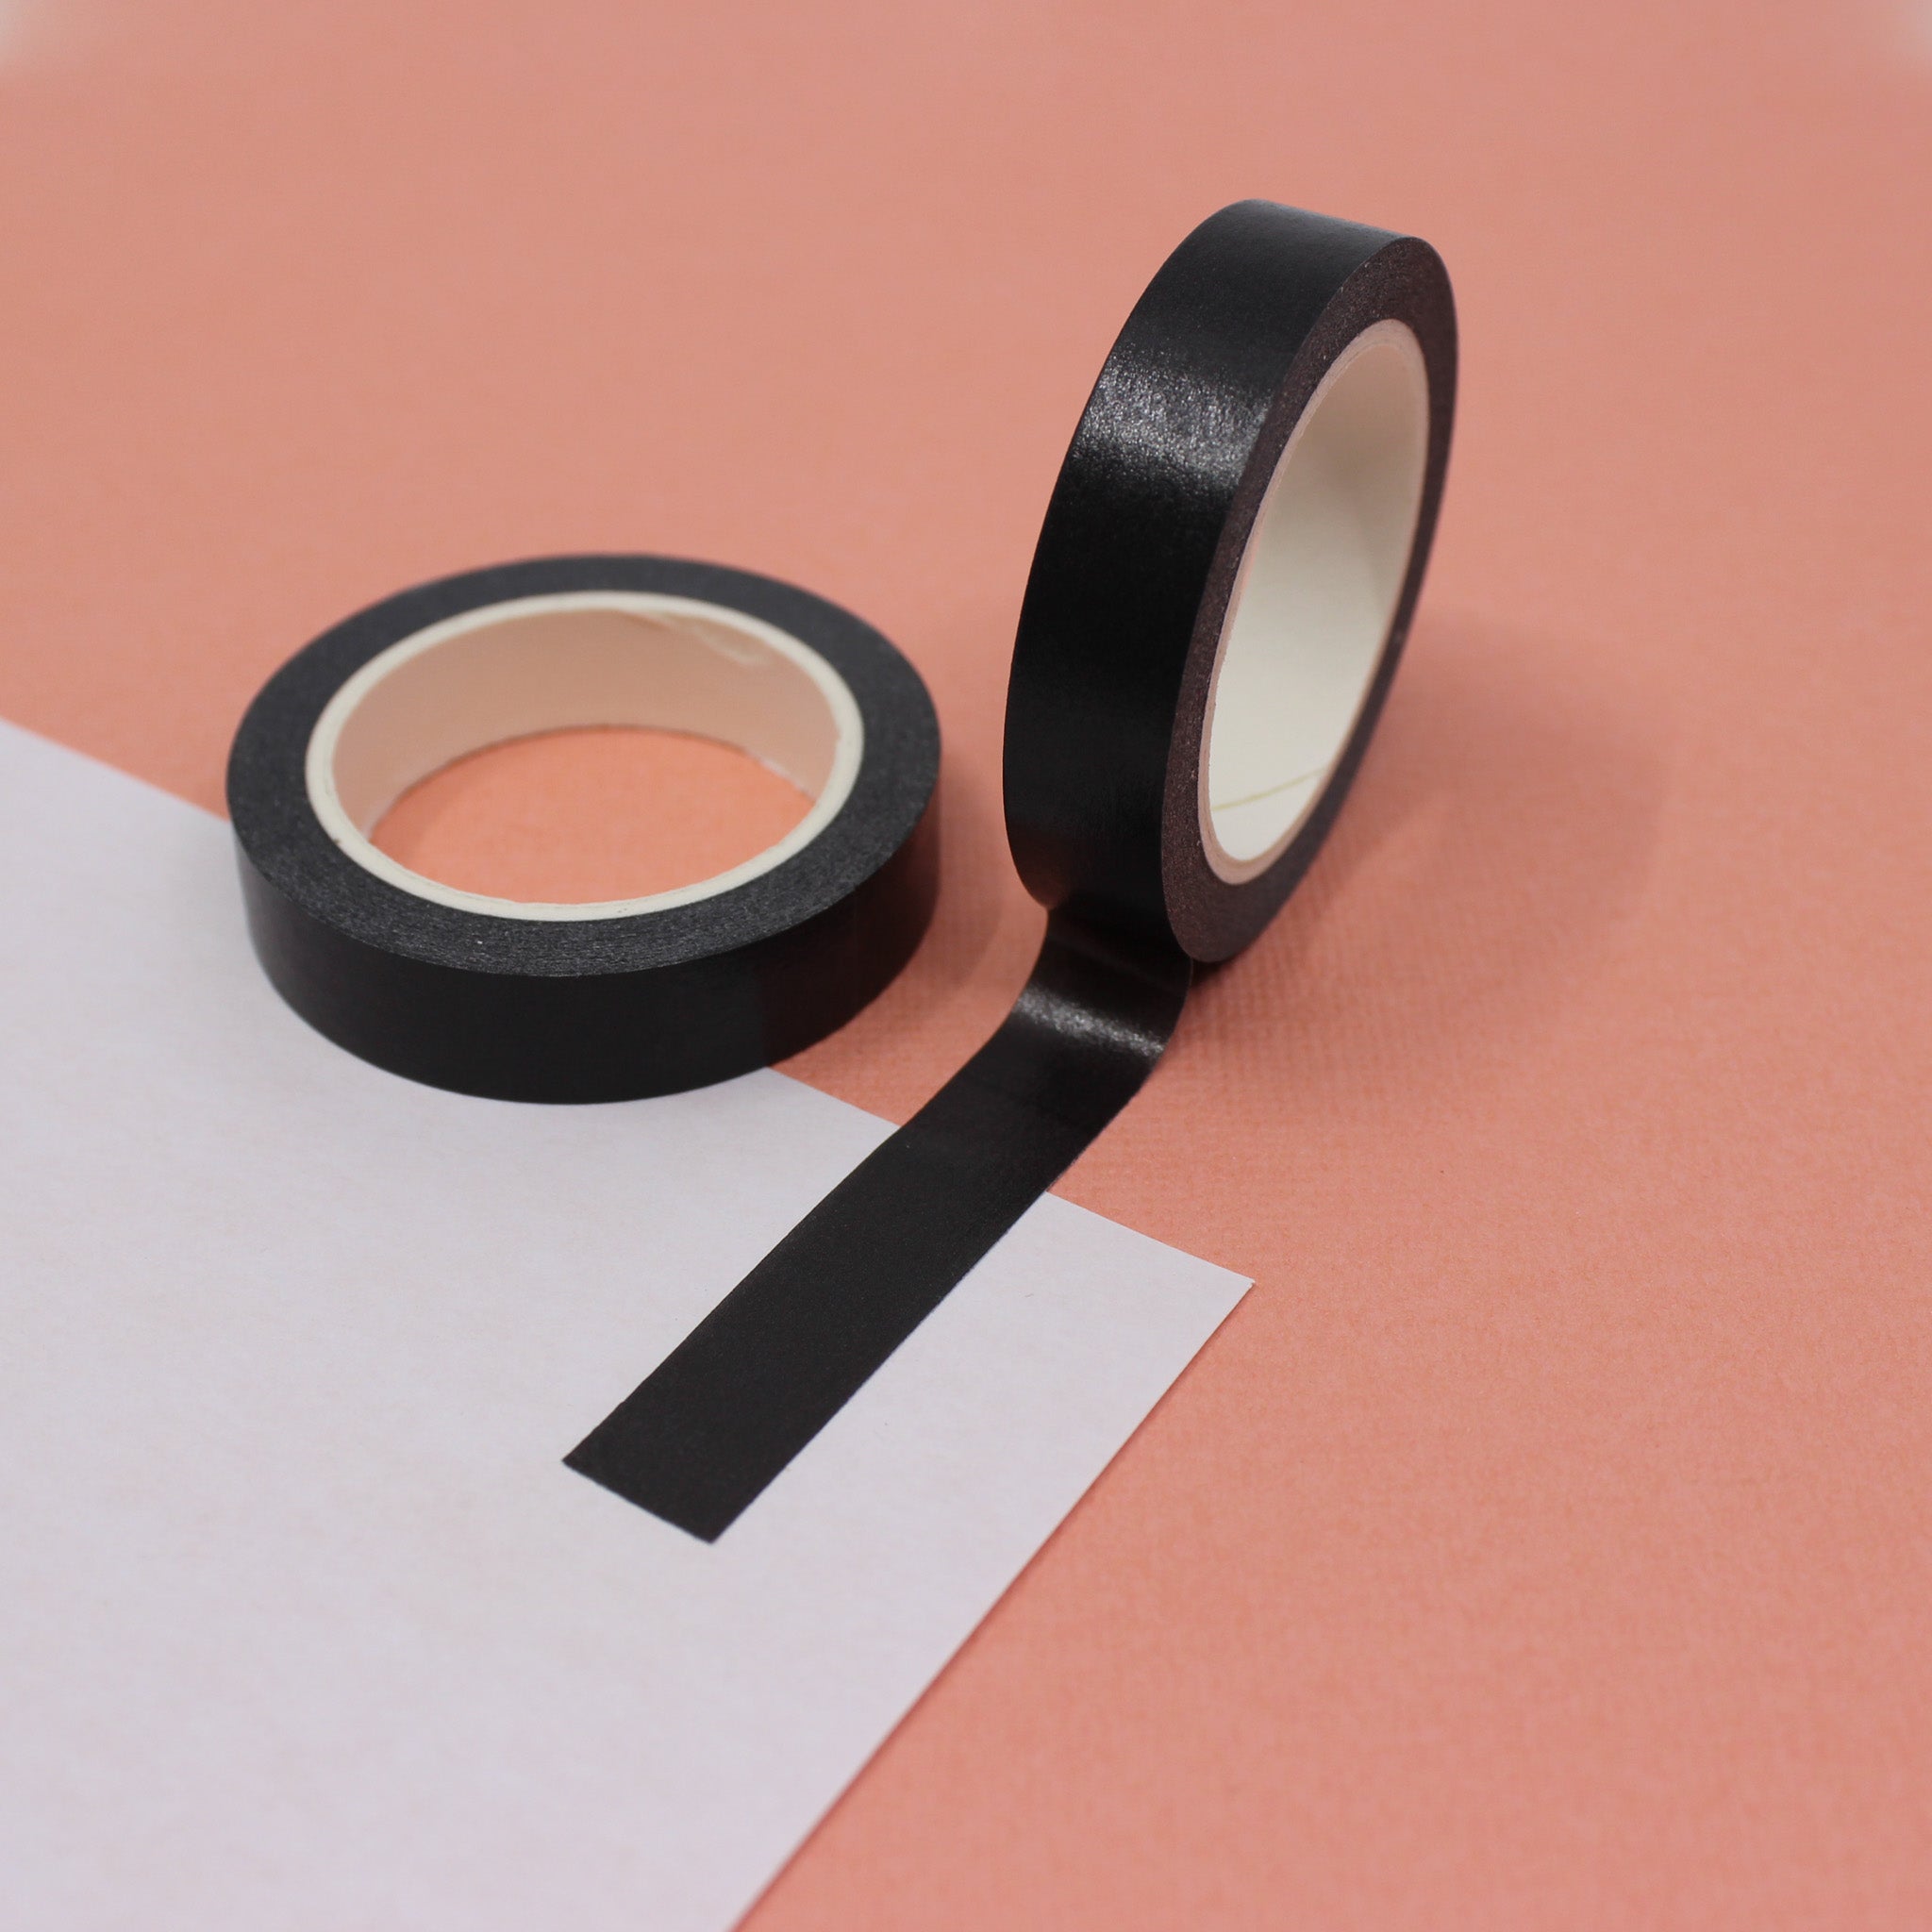 Infuse your projects with the elegance of black using our washi tape, adorned with a solid black design that adds a timeless and sophisticated element to your crafts. This tape is sold at BBB Supplies Craft Shop.